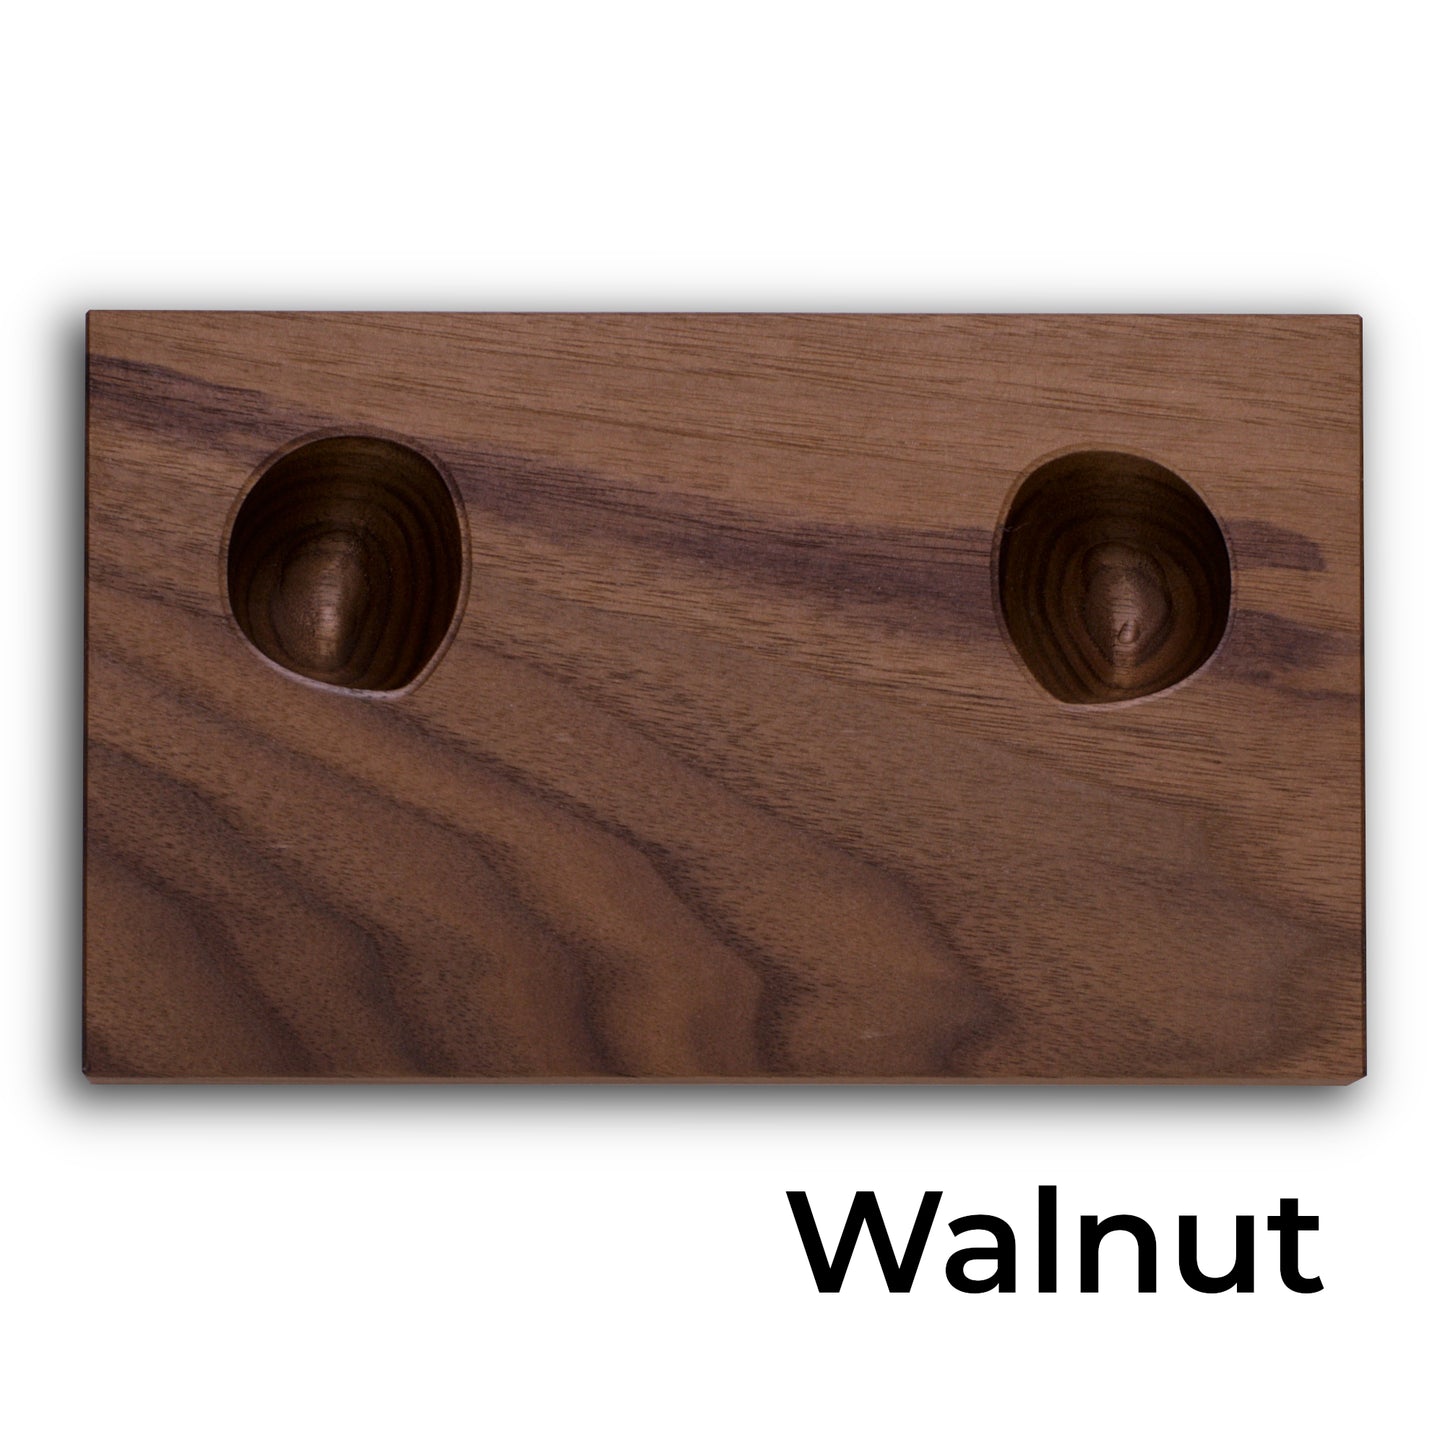 Wooden stand in walnut for Xbox series X|S controller